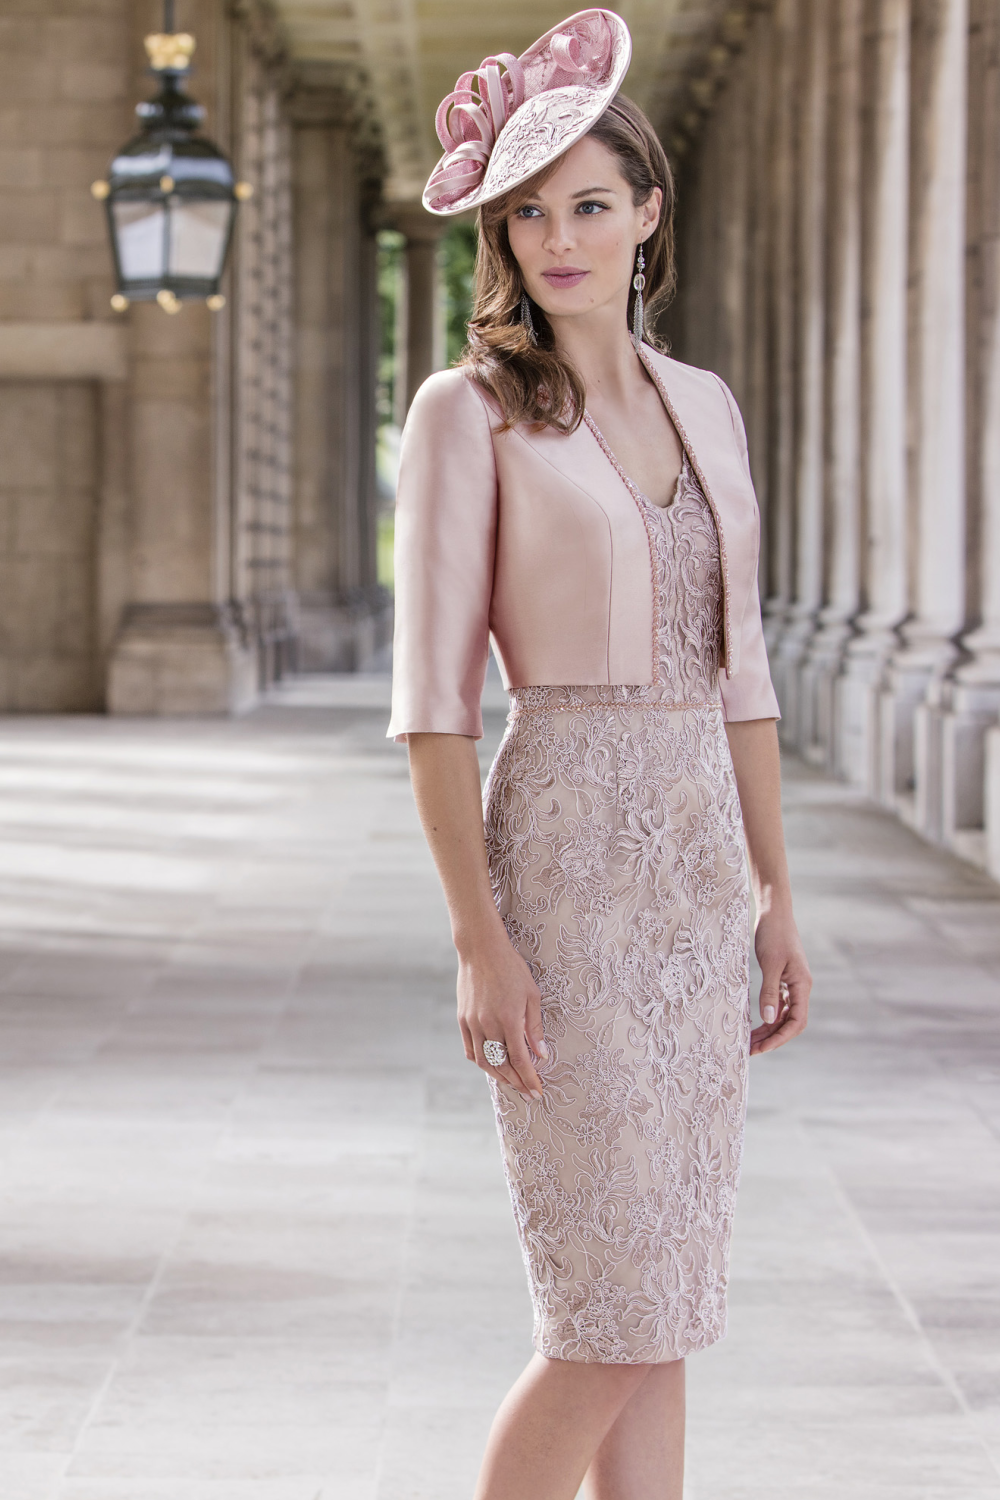 Manor Fashions - Mother of the bride & special occasion outfits - Cornwall